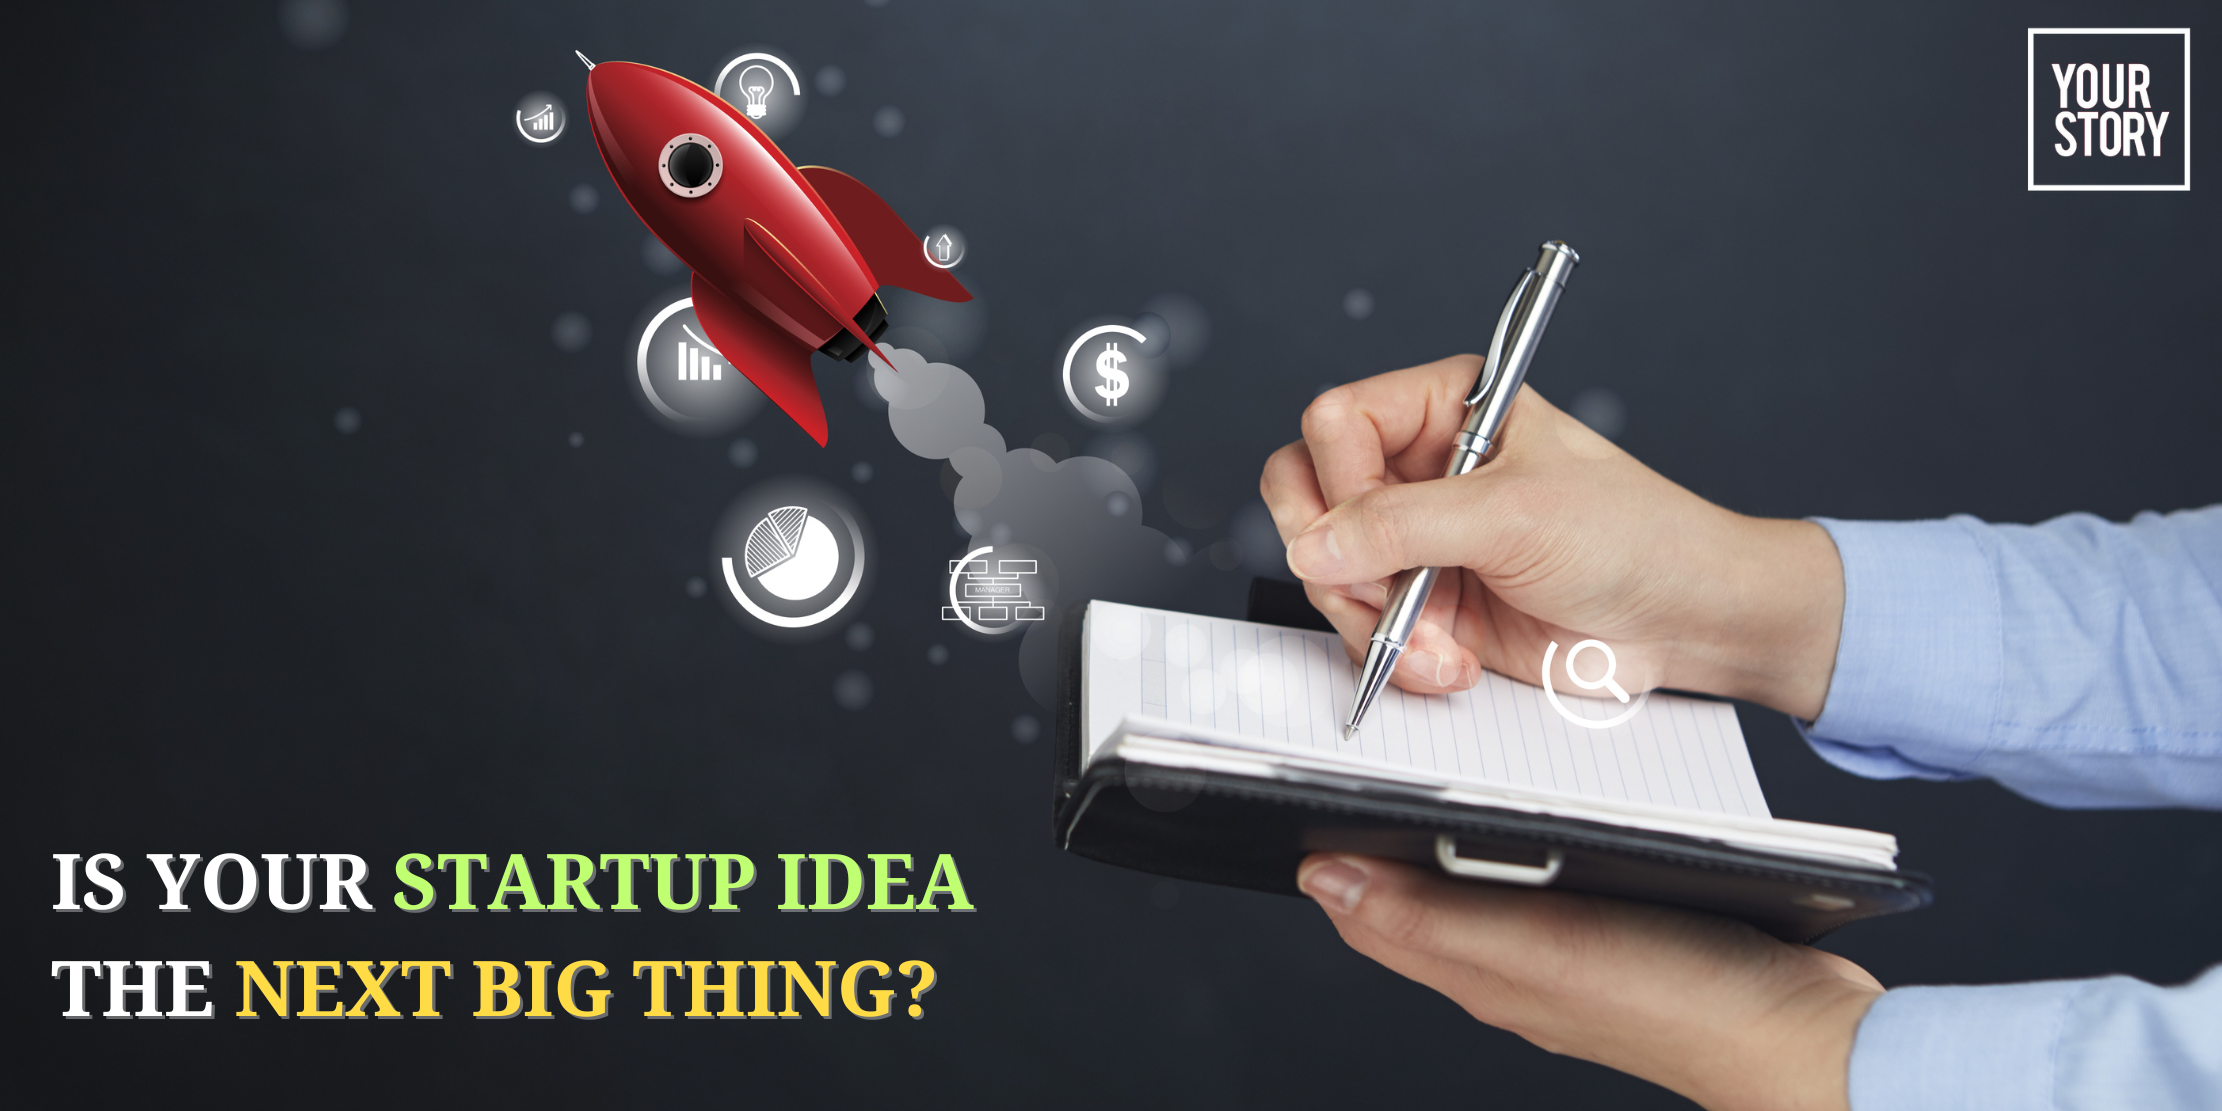 ⁠From Garage to Global: 5 Signs Your Startup Idea Might Be the Next Big Thing